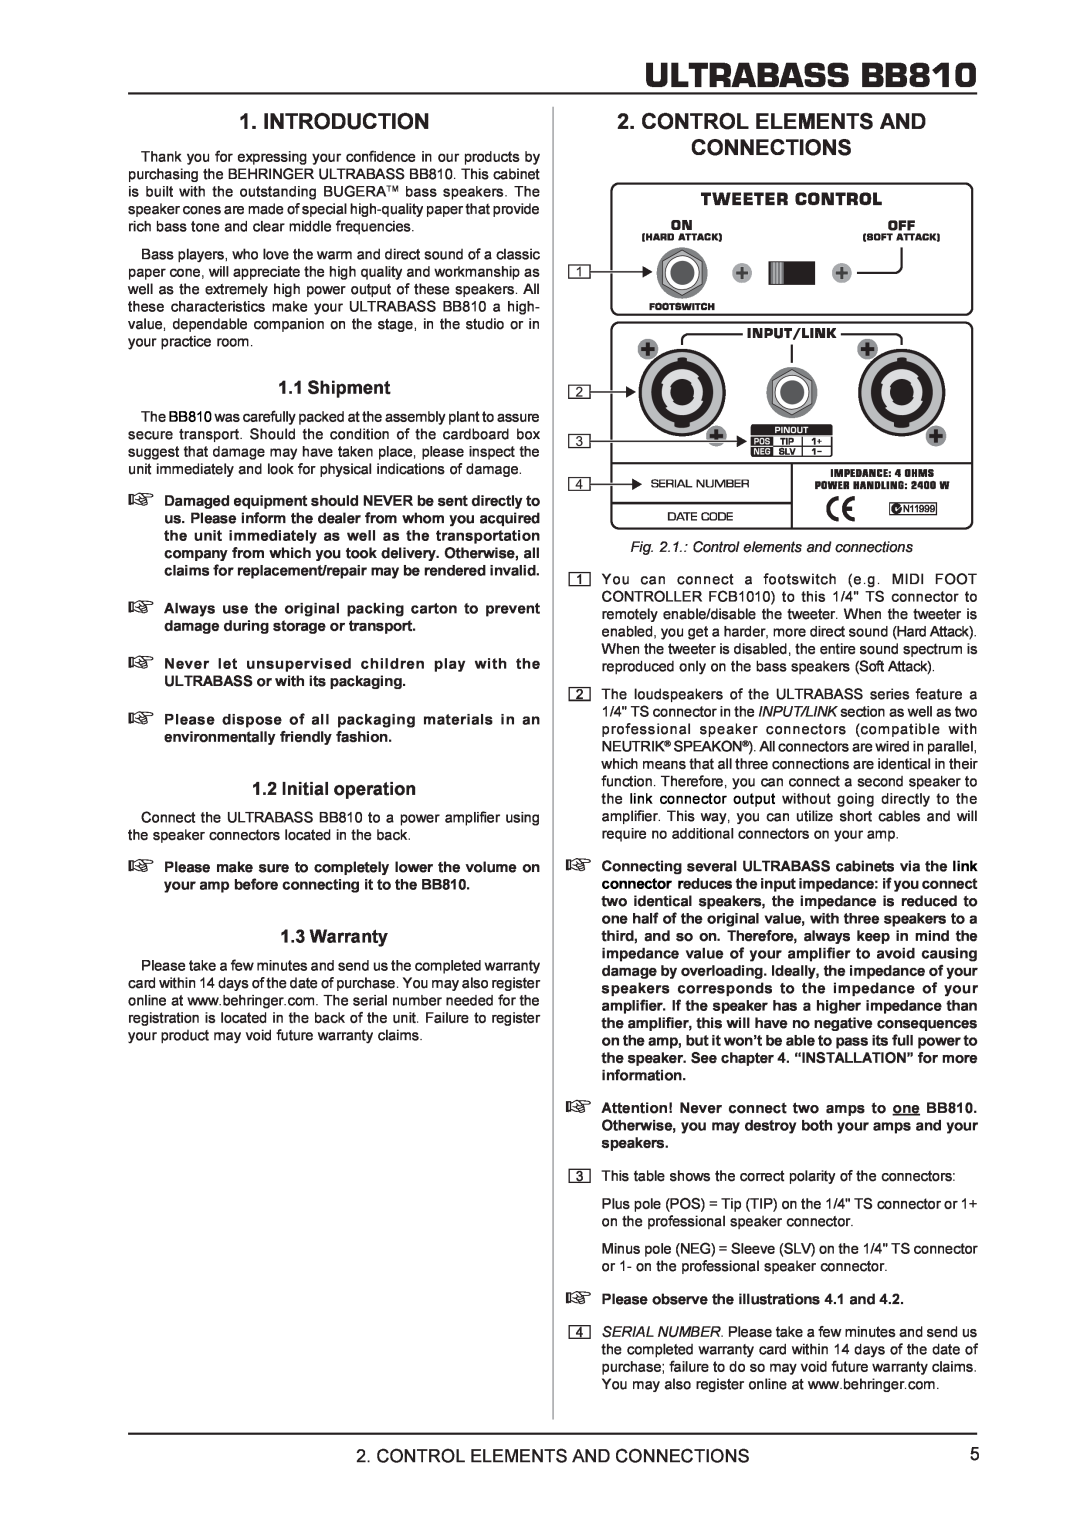 Behringer manual Introduction, Control Elements And Connections, ULTRABASS BB810, Shipment, Initial operation, Warranty 